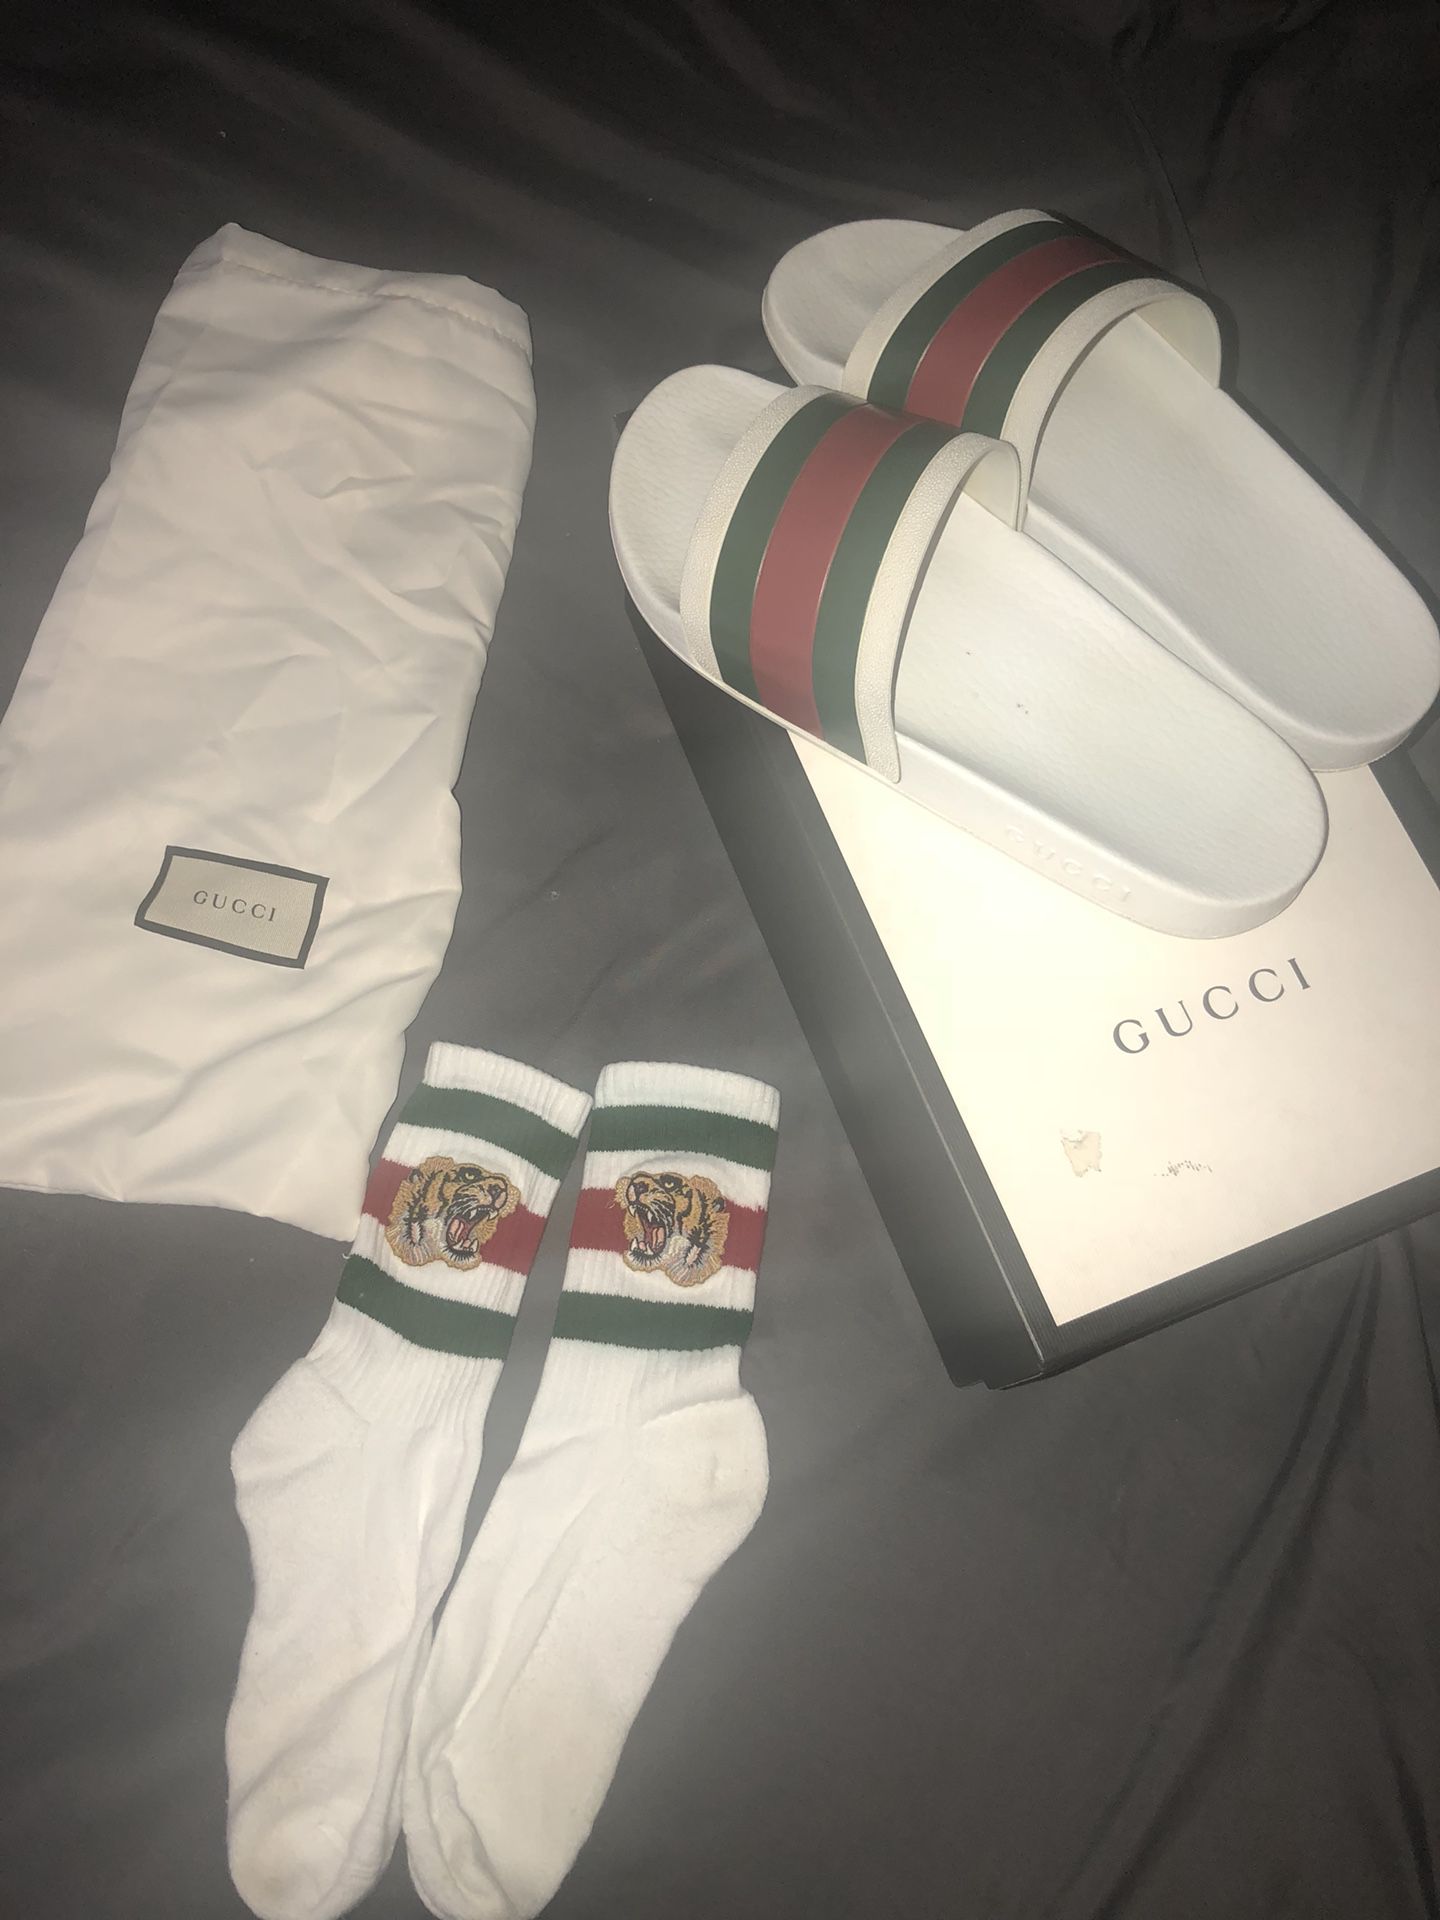 Gucci socks for Sale in Shelbyville, TN - OfferUp